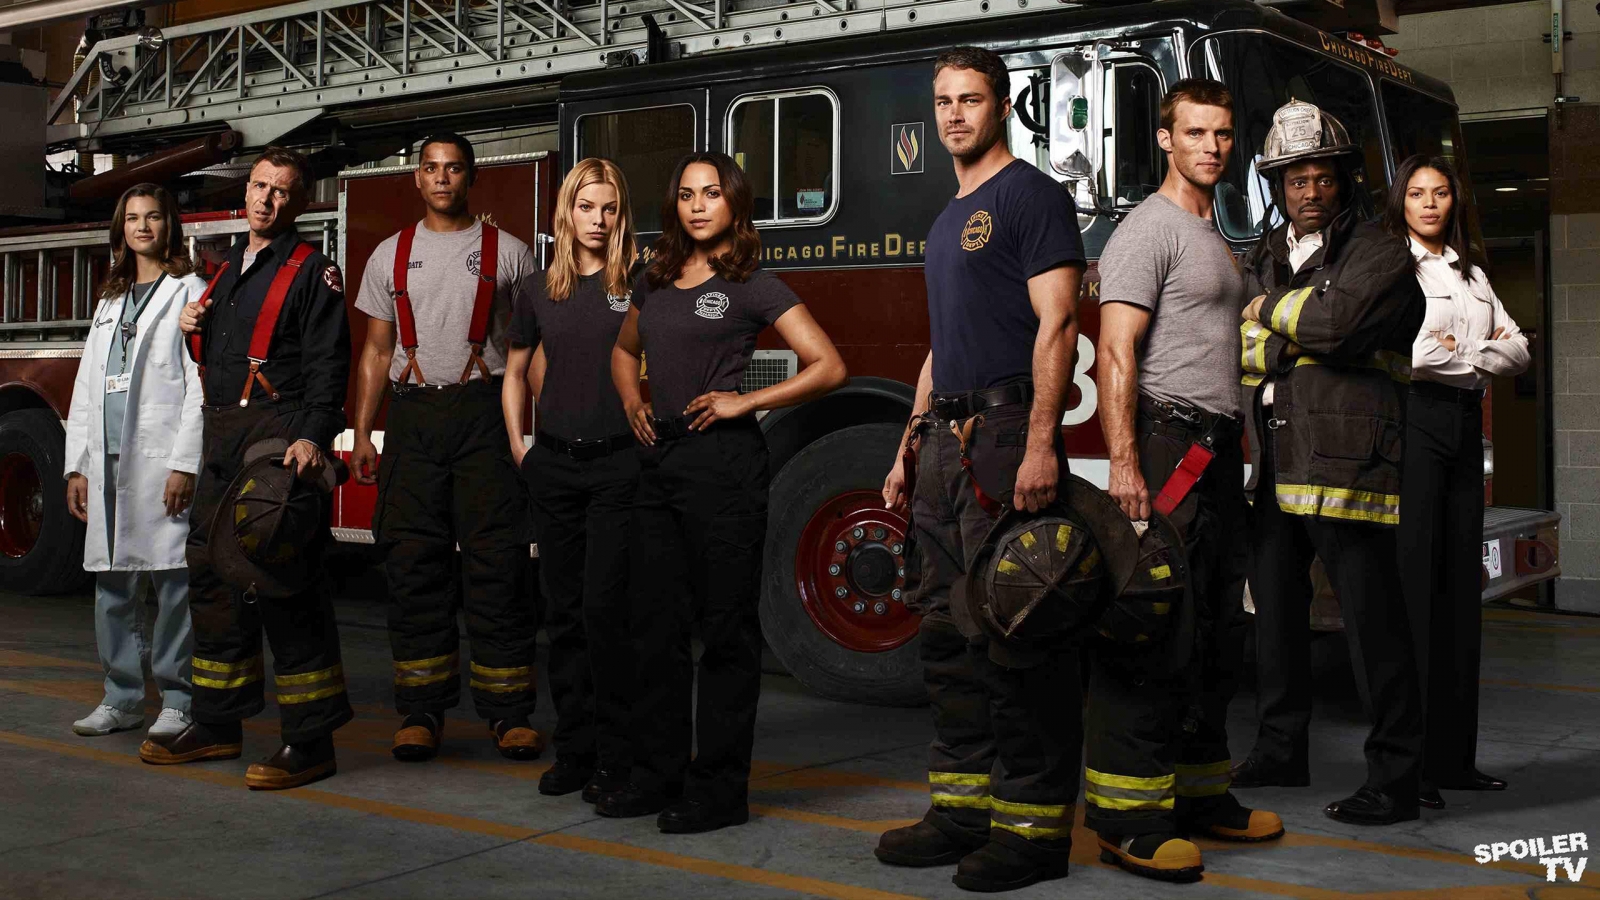 Chicago Fire Tv Show for 1600 x 900 HDTV resolution